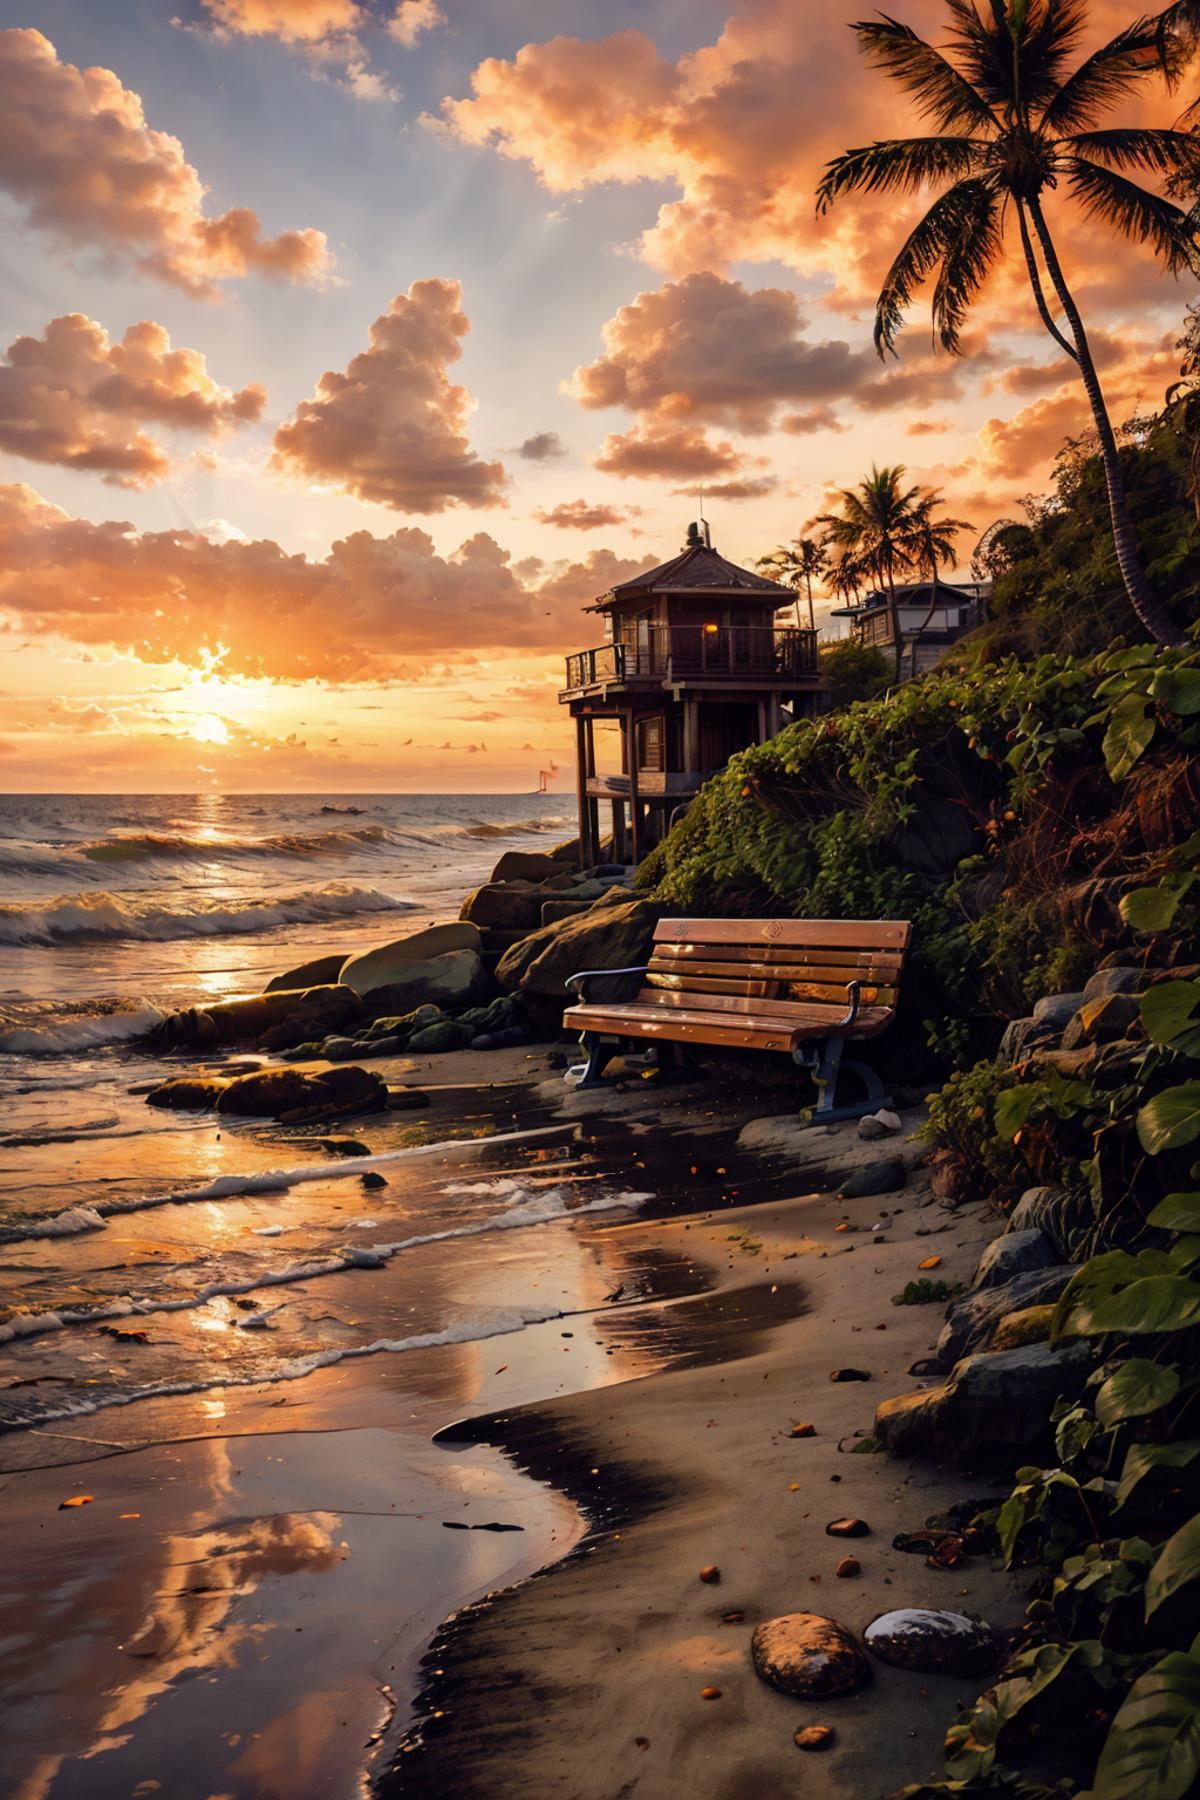 A peaceful beach scene with a bench and a house in the background.